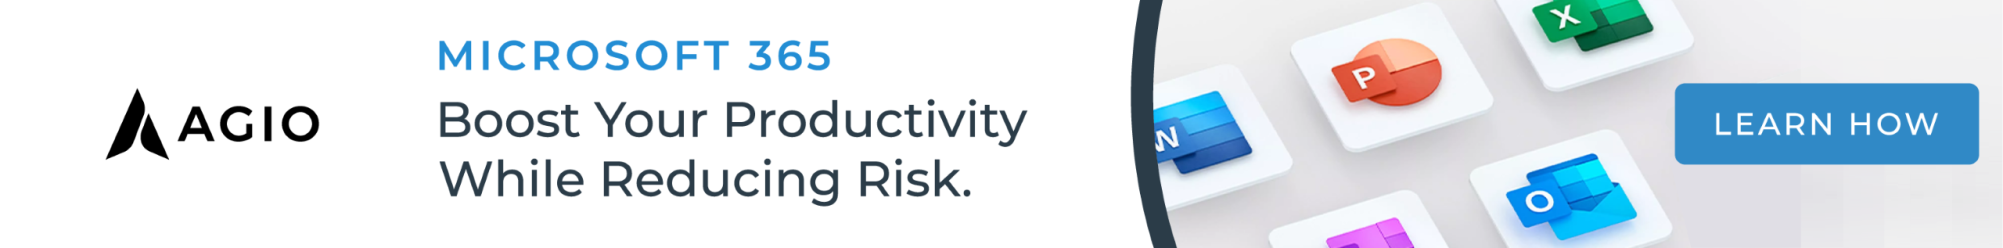 microsoft 365 boost your productivity while reducing risk